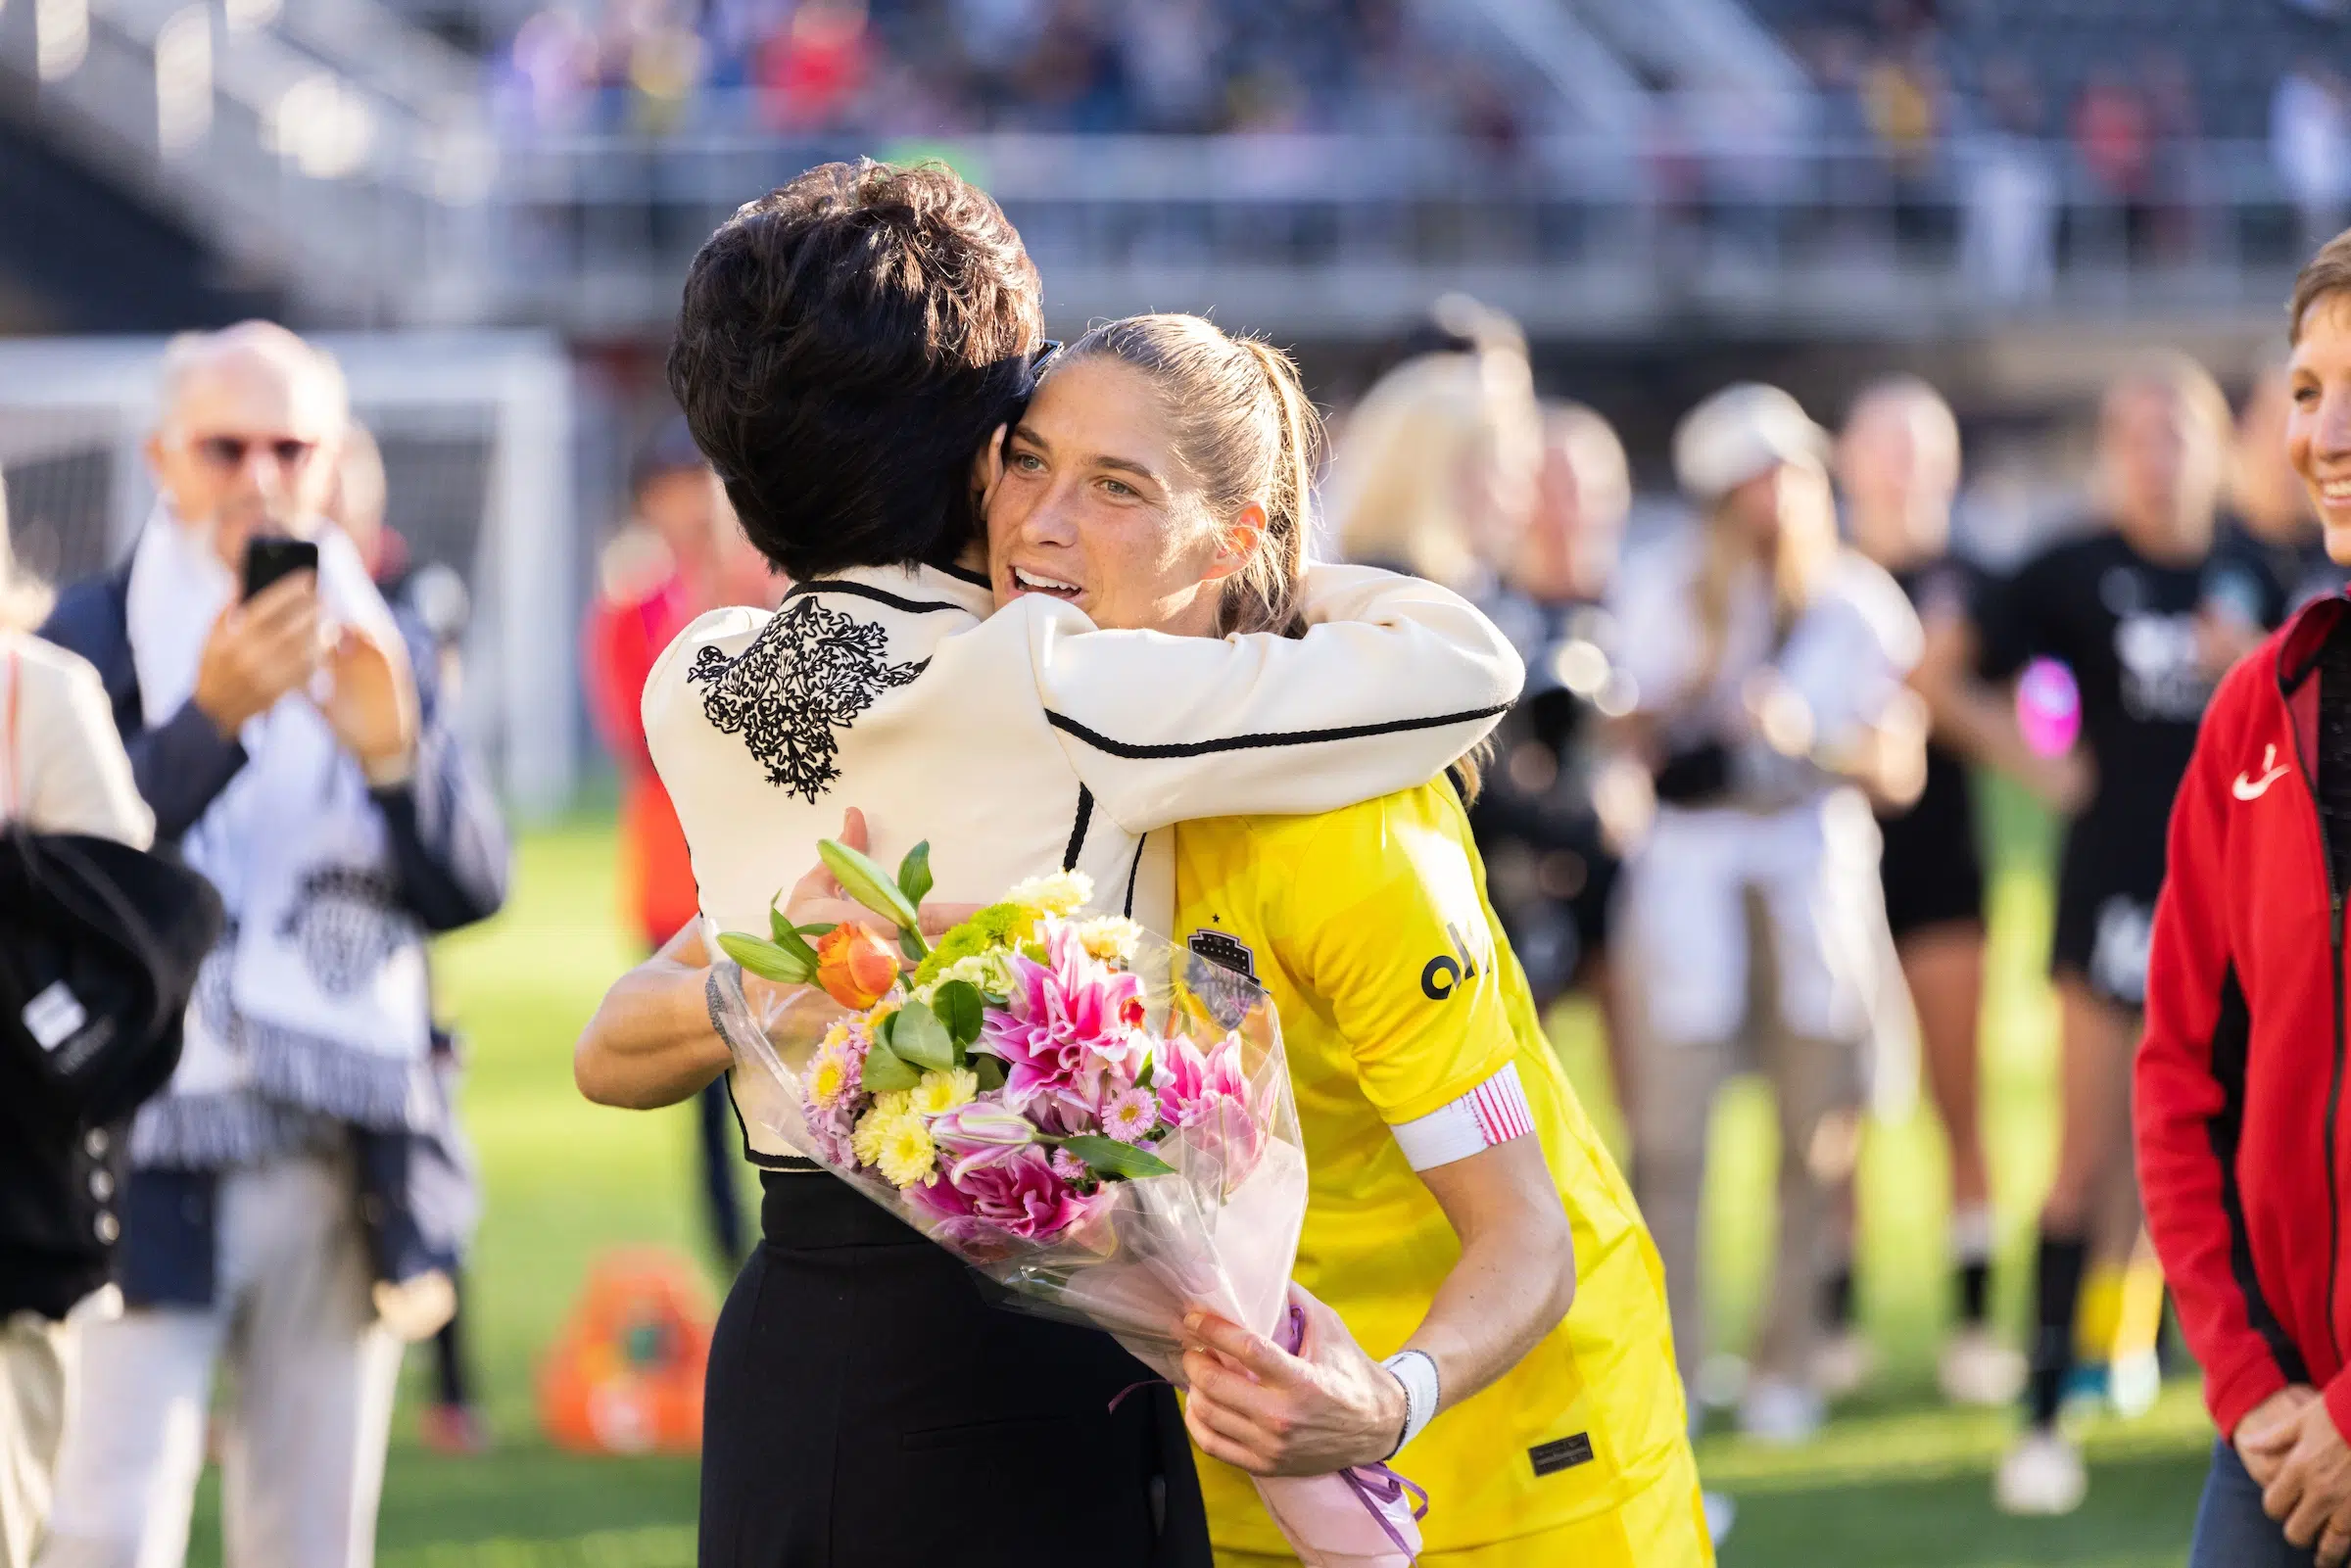 Aubrey Kingsbury in a yellow uniform holds a bouquet of flowers in one hand and hugs Michele Kang.